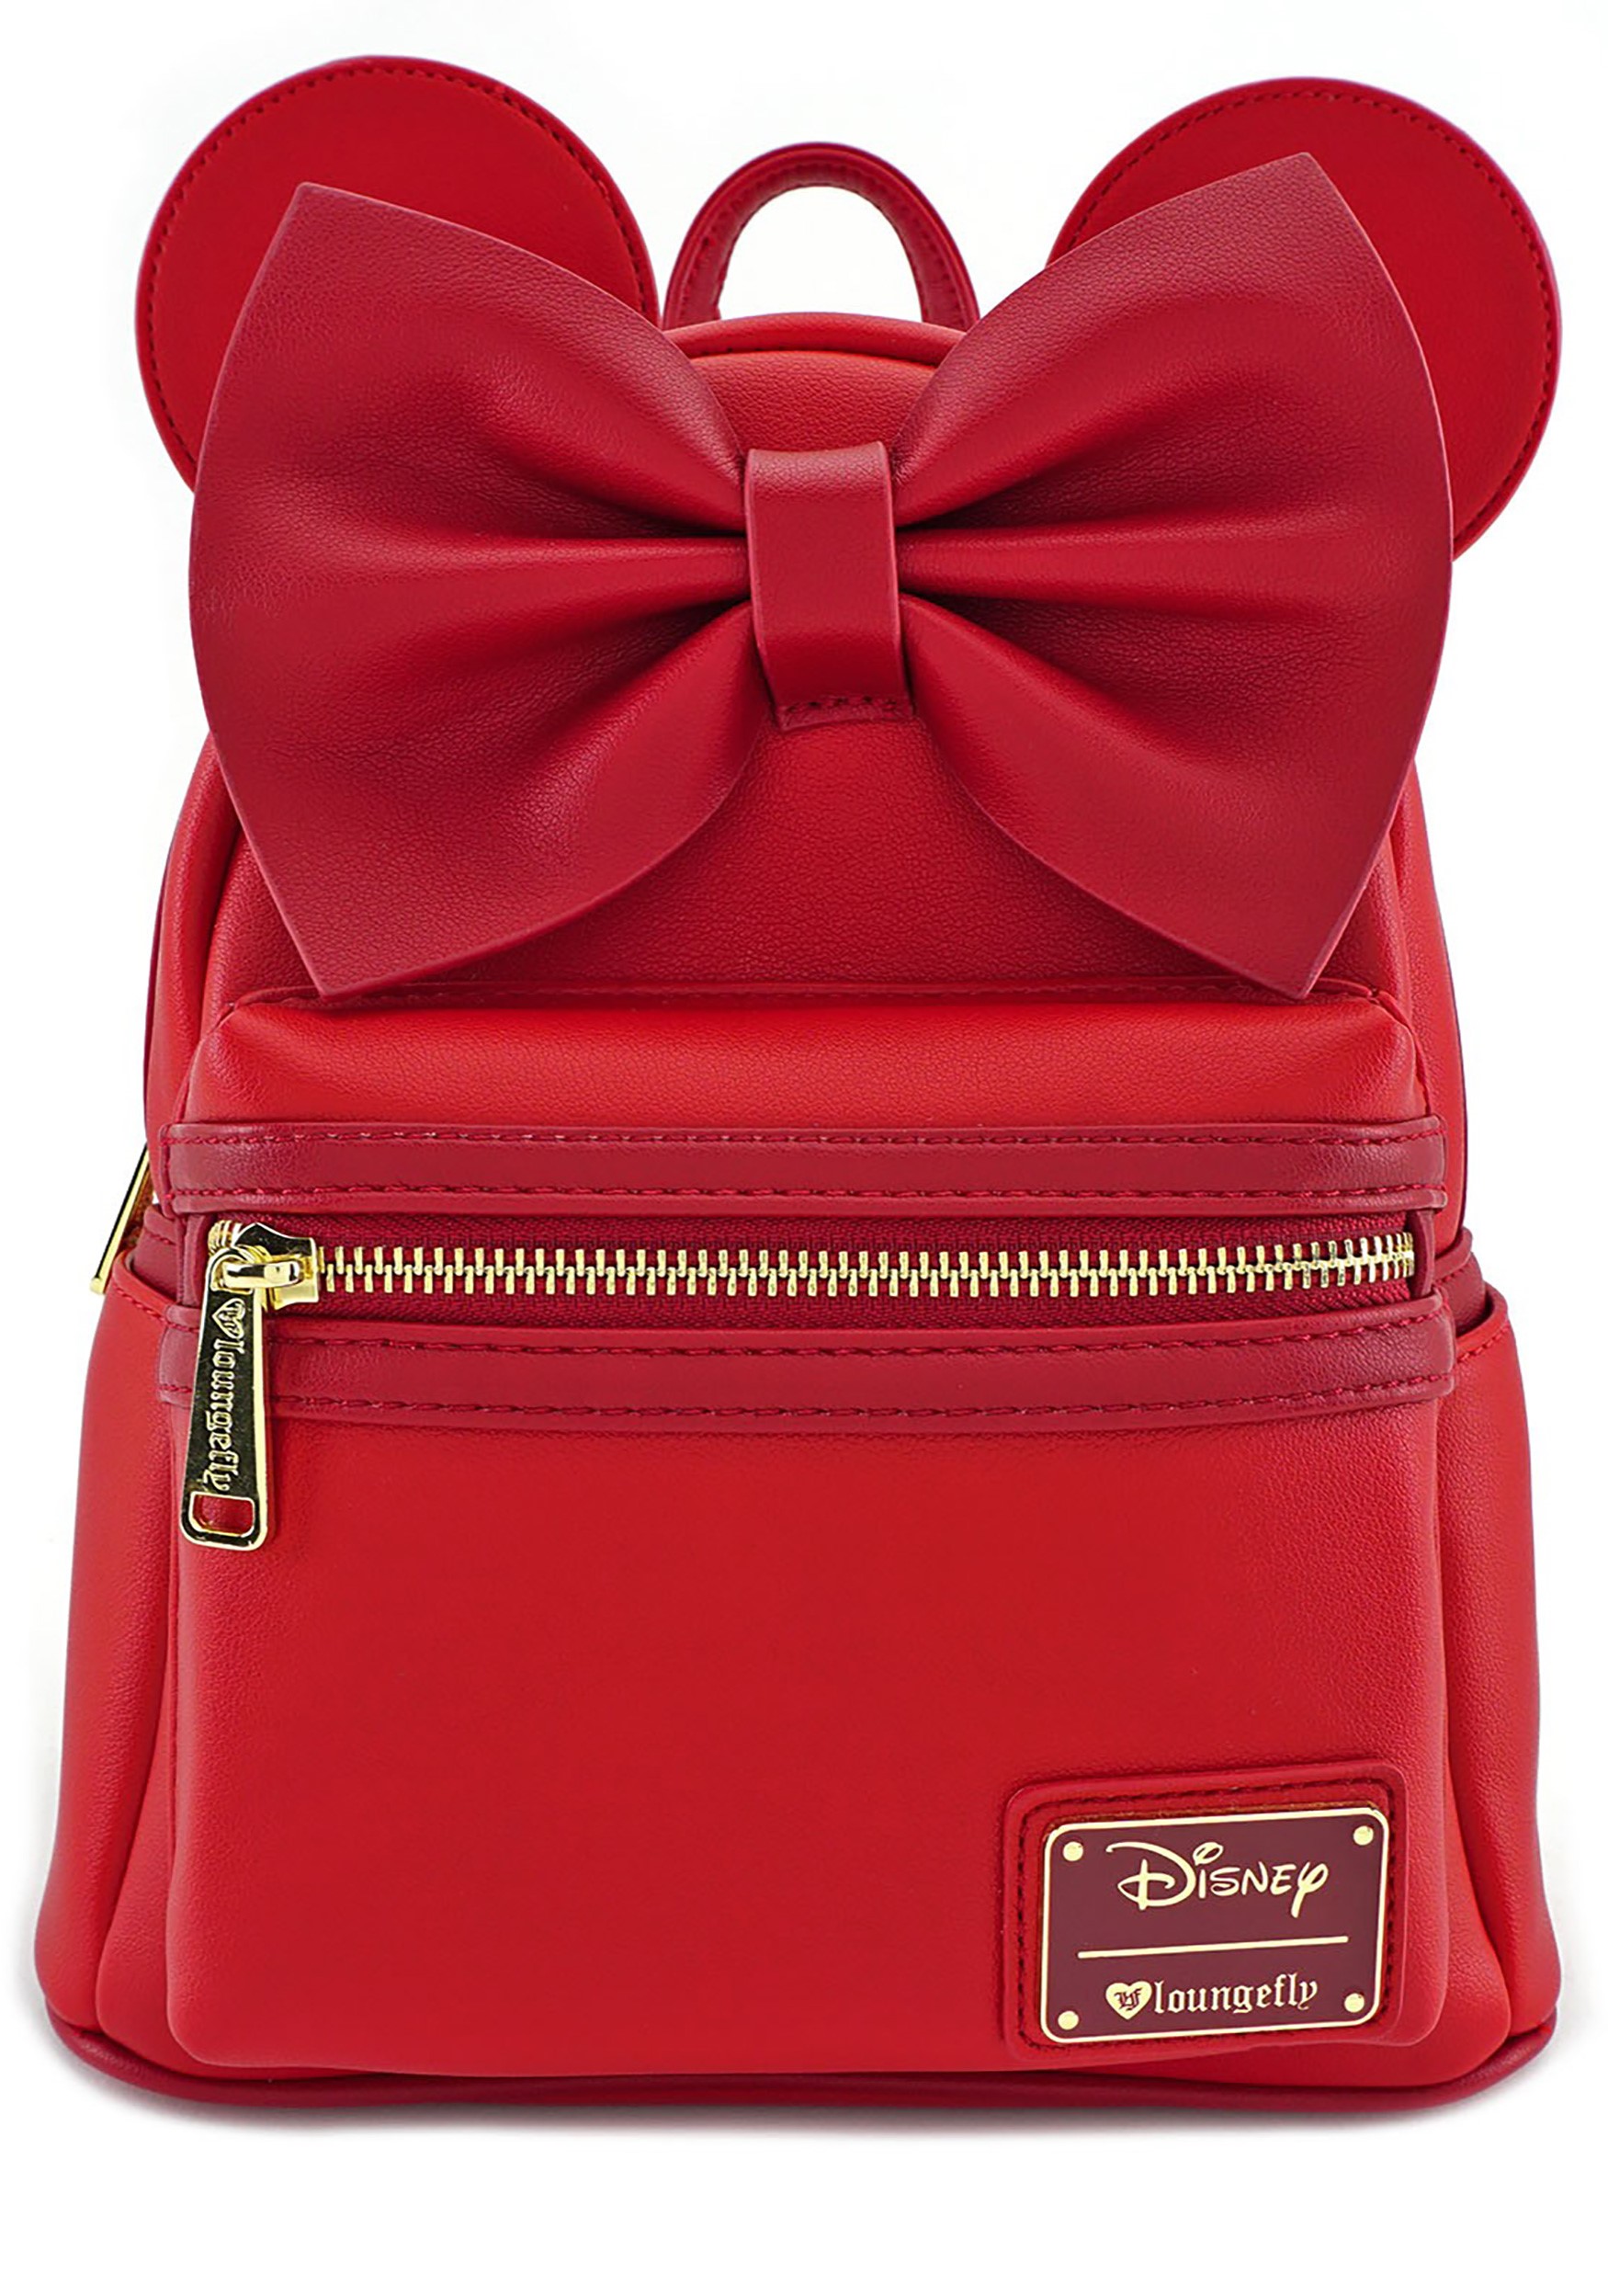 Minnie Mouse Red Faux Leather Mini Backpack by Loungefly